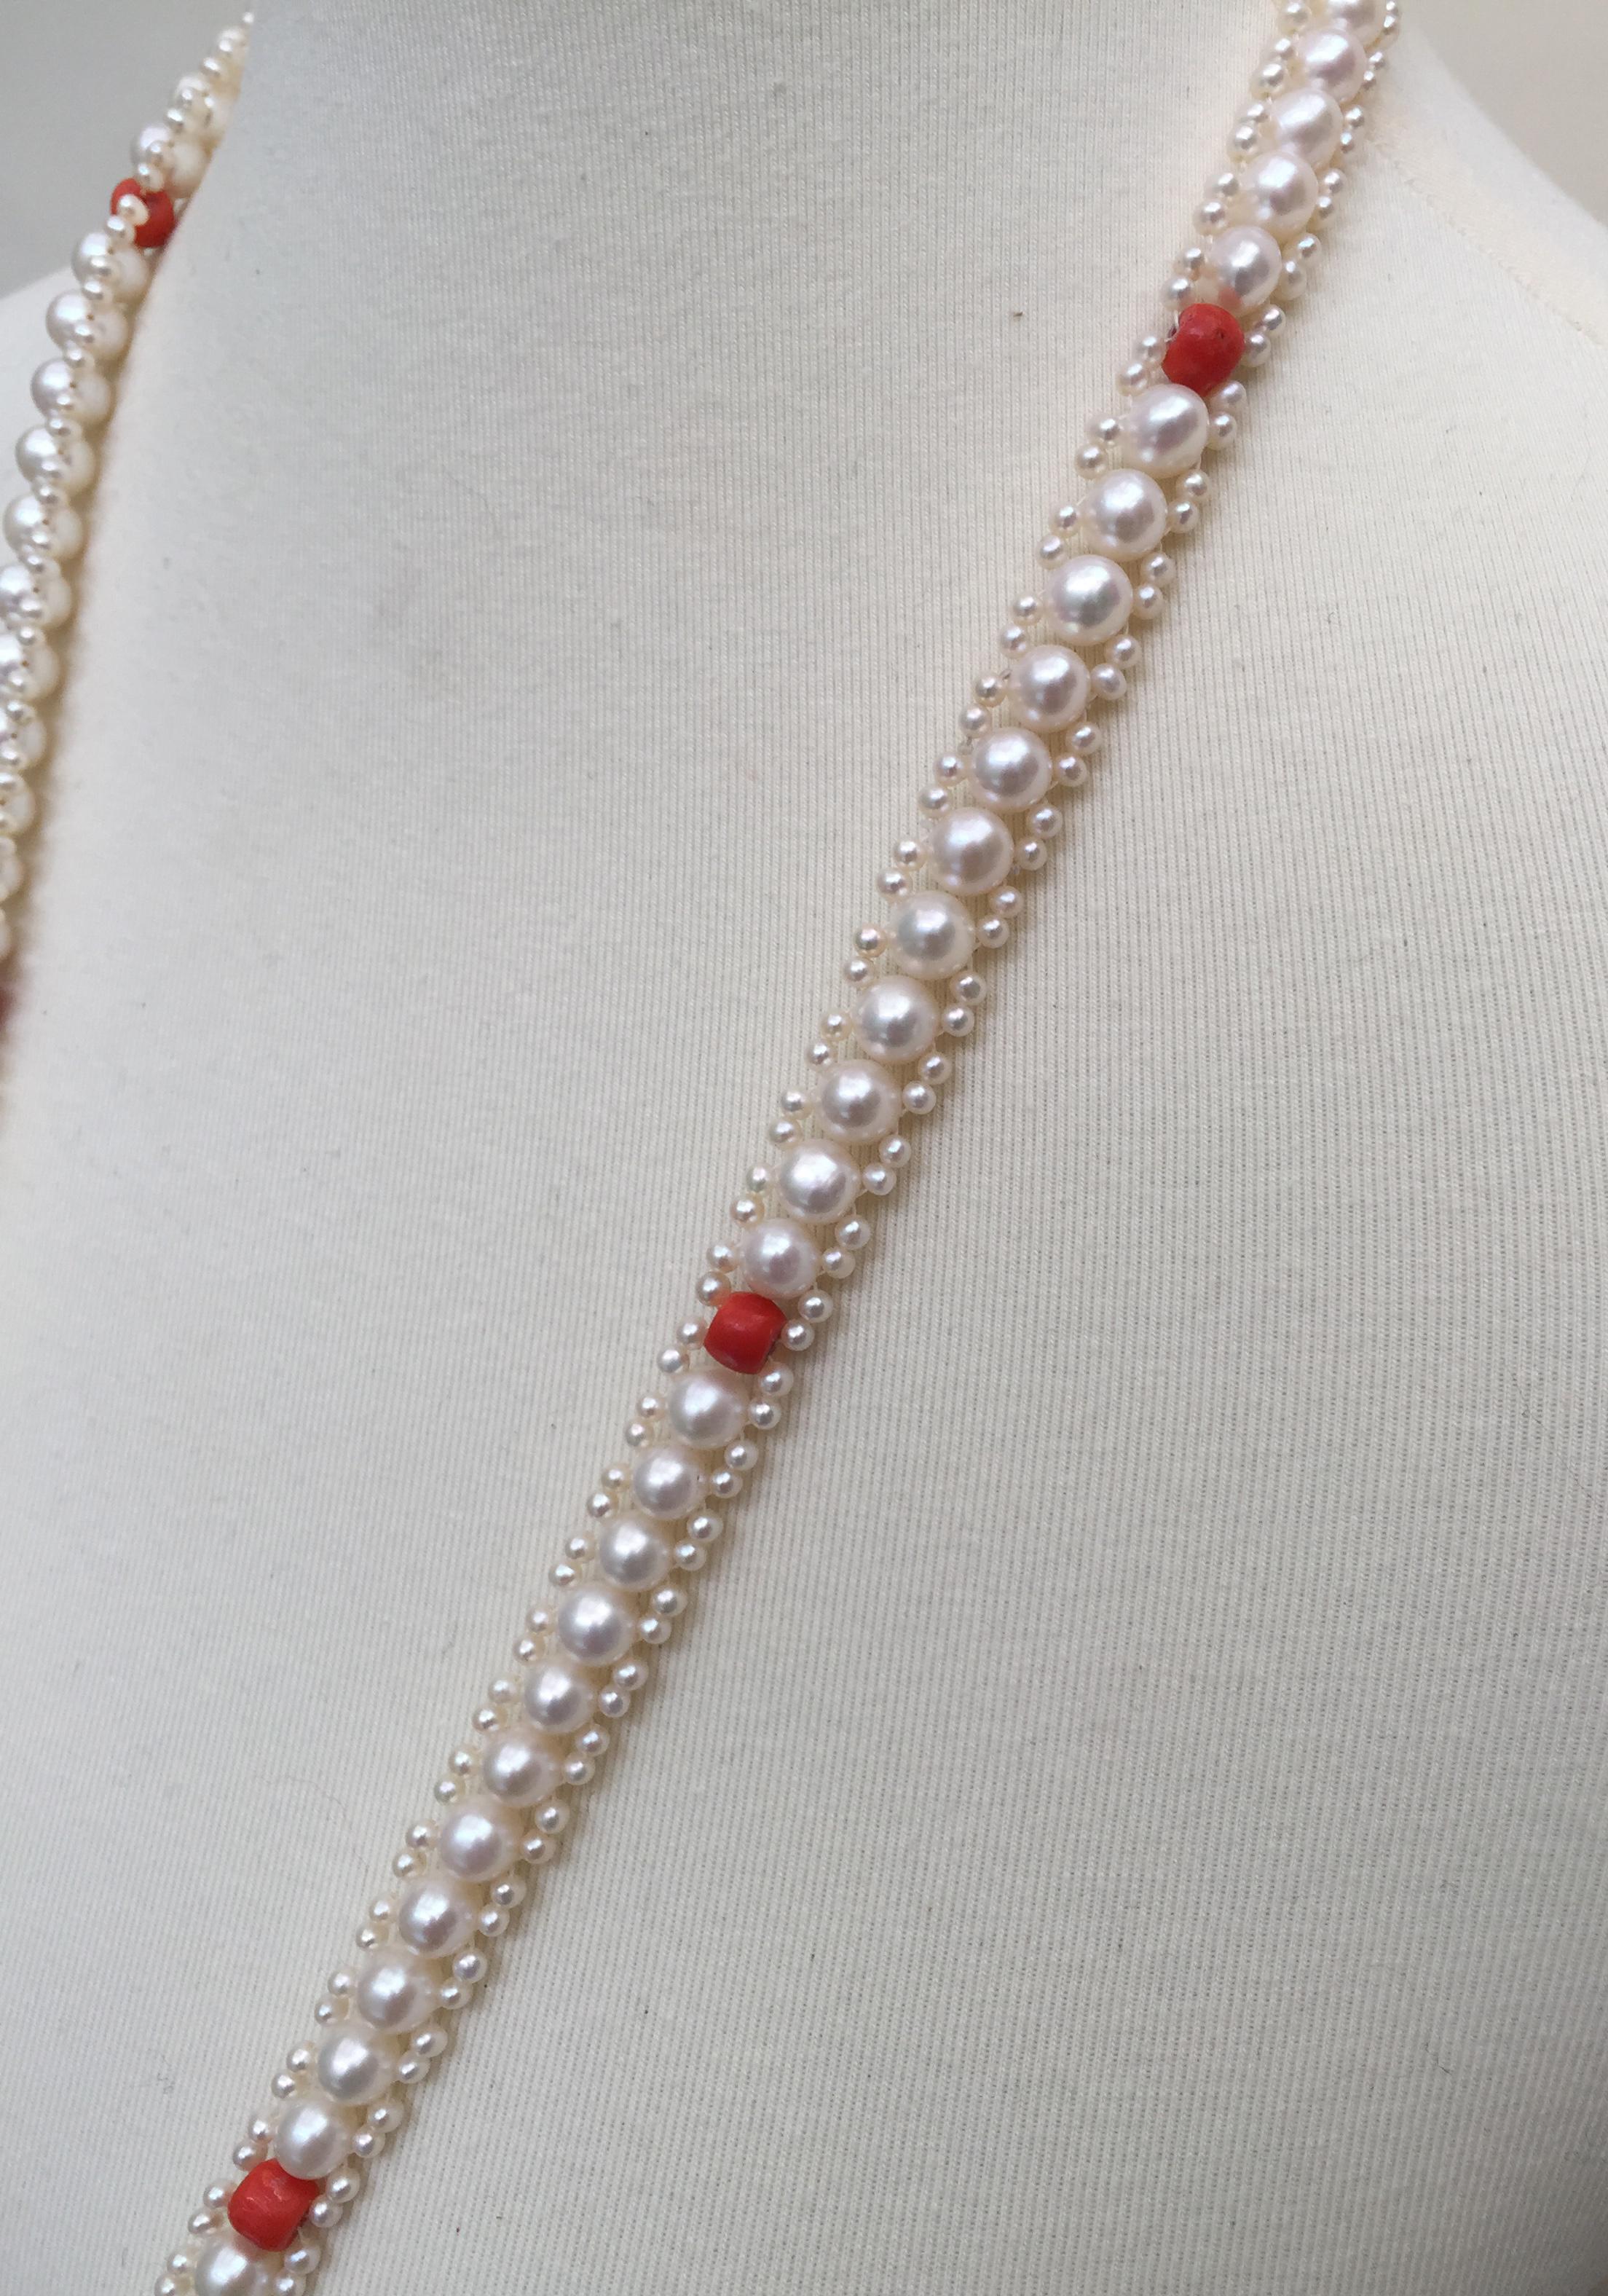 Women's Woven White Pearl and Coral Necklace with Large Baroque Pearl, Gold and Diamonds